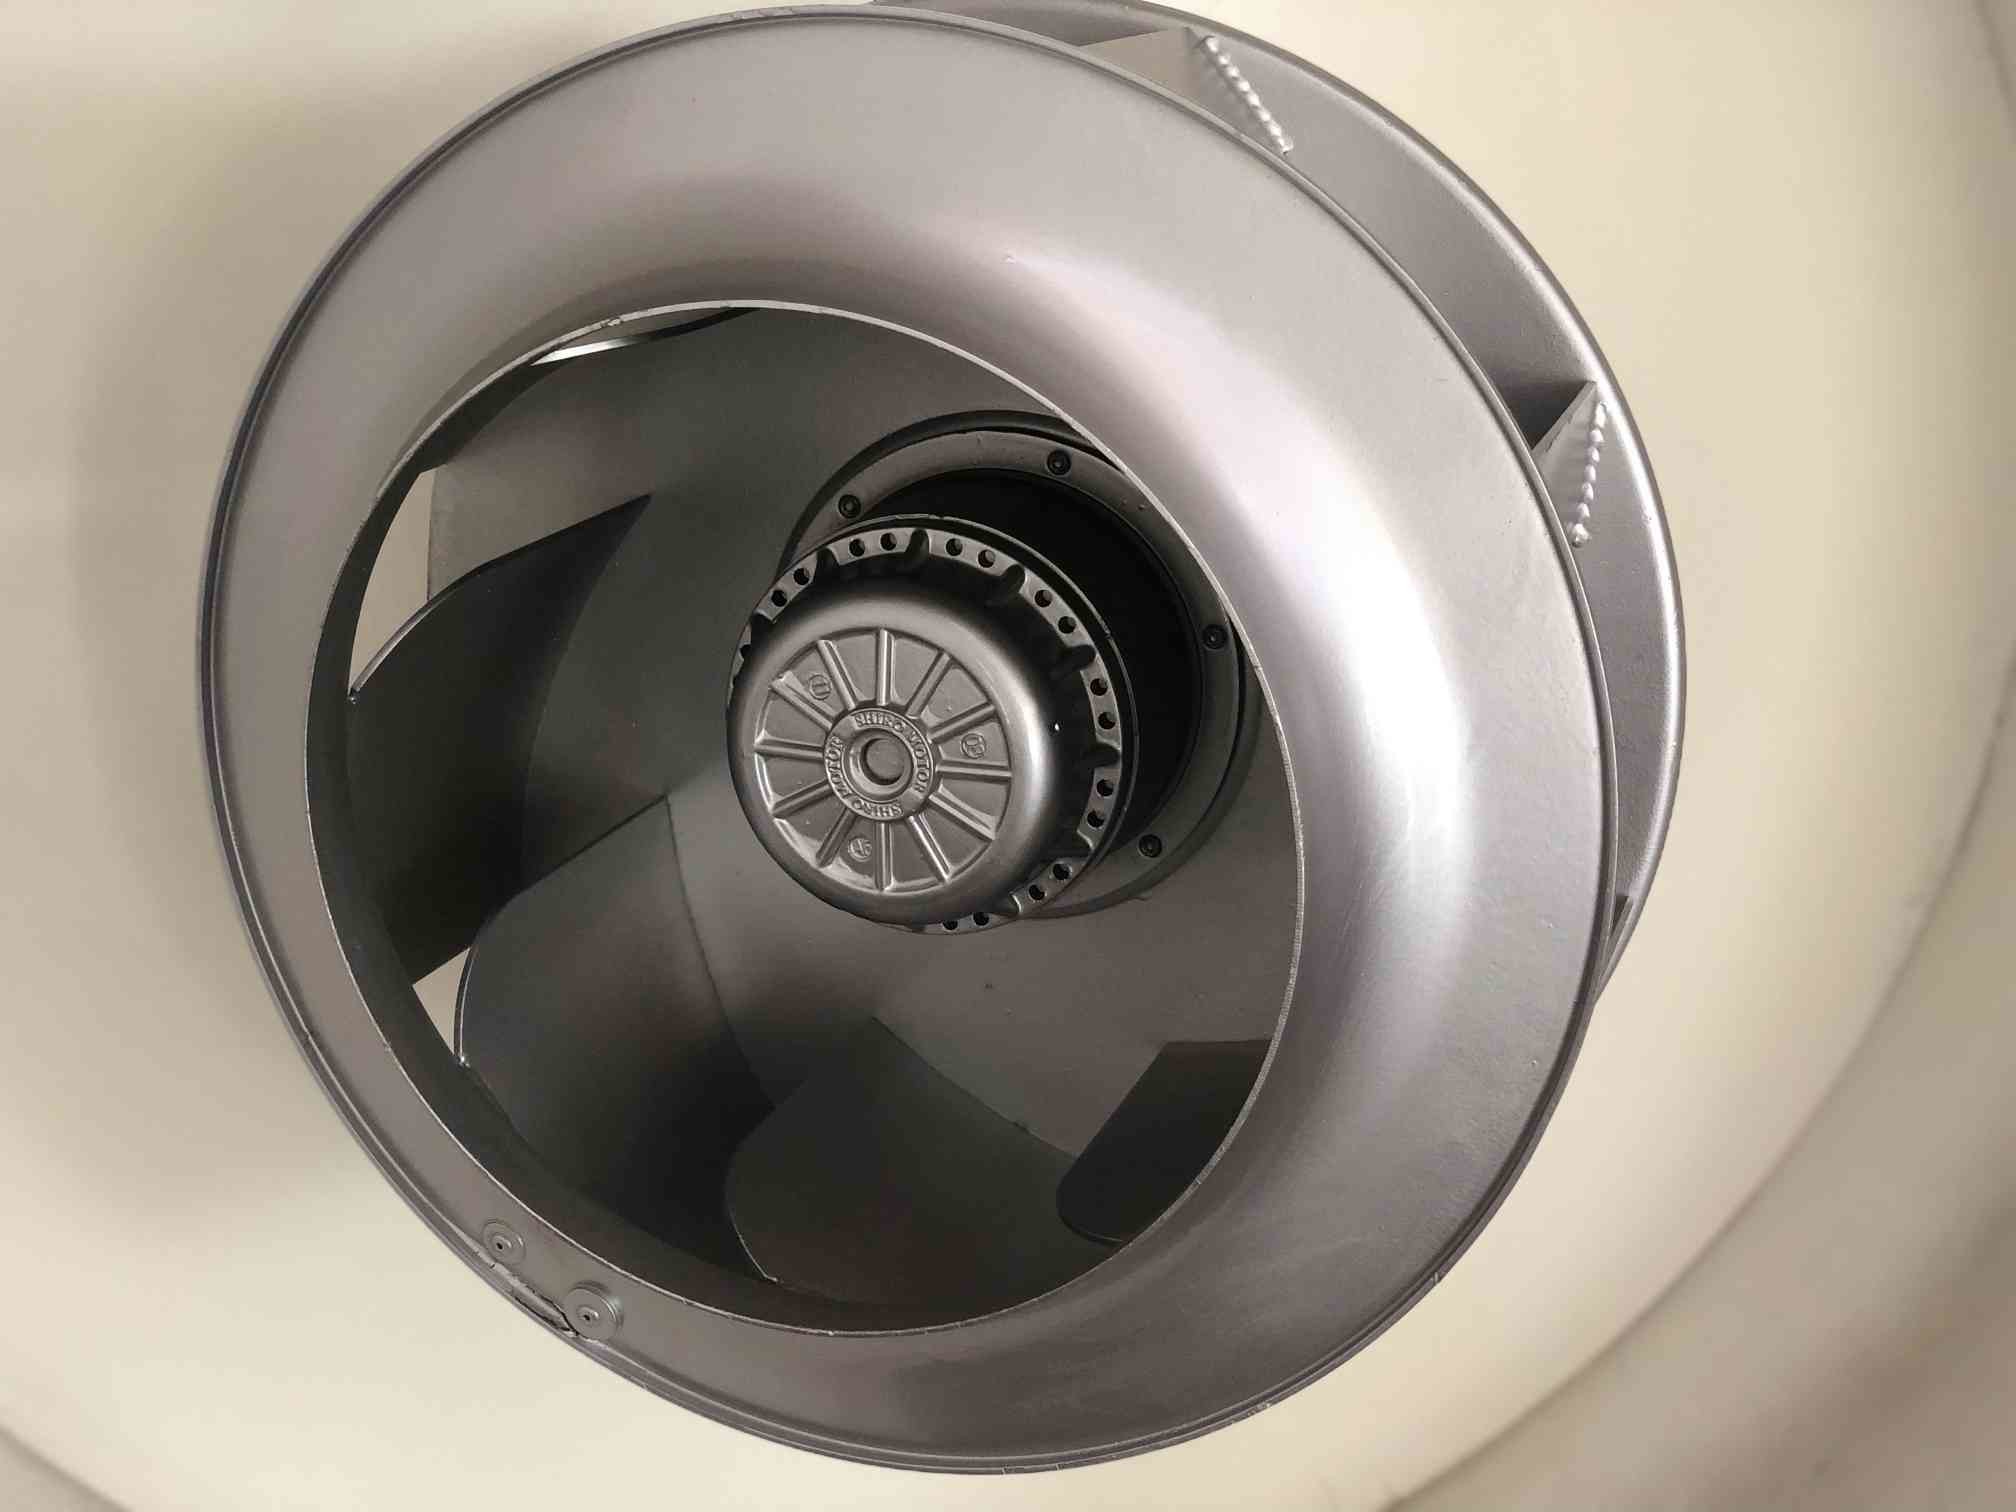  315mm 1428 rpm Centrifugal Exhaust Fan Single Phase 4 Pole External Rotor Fan Manufactures